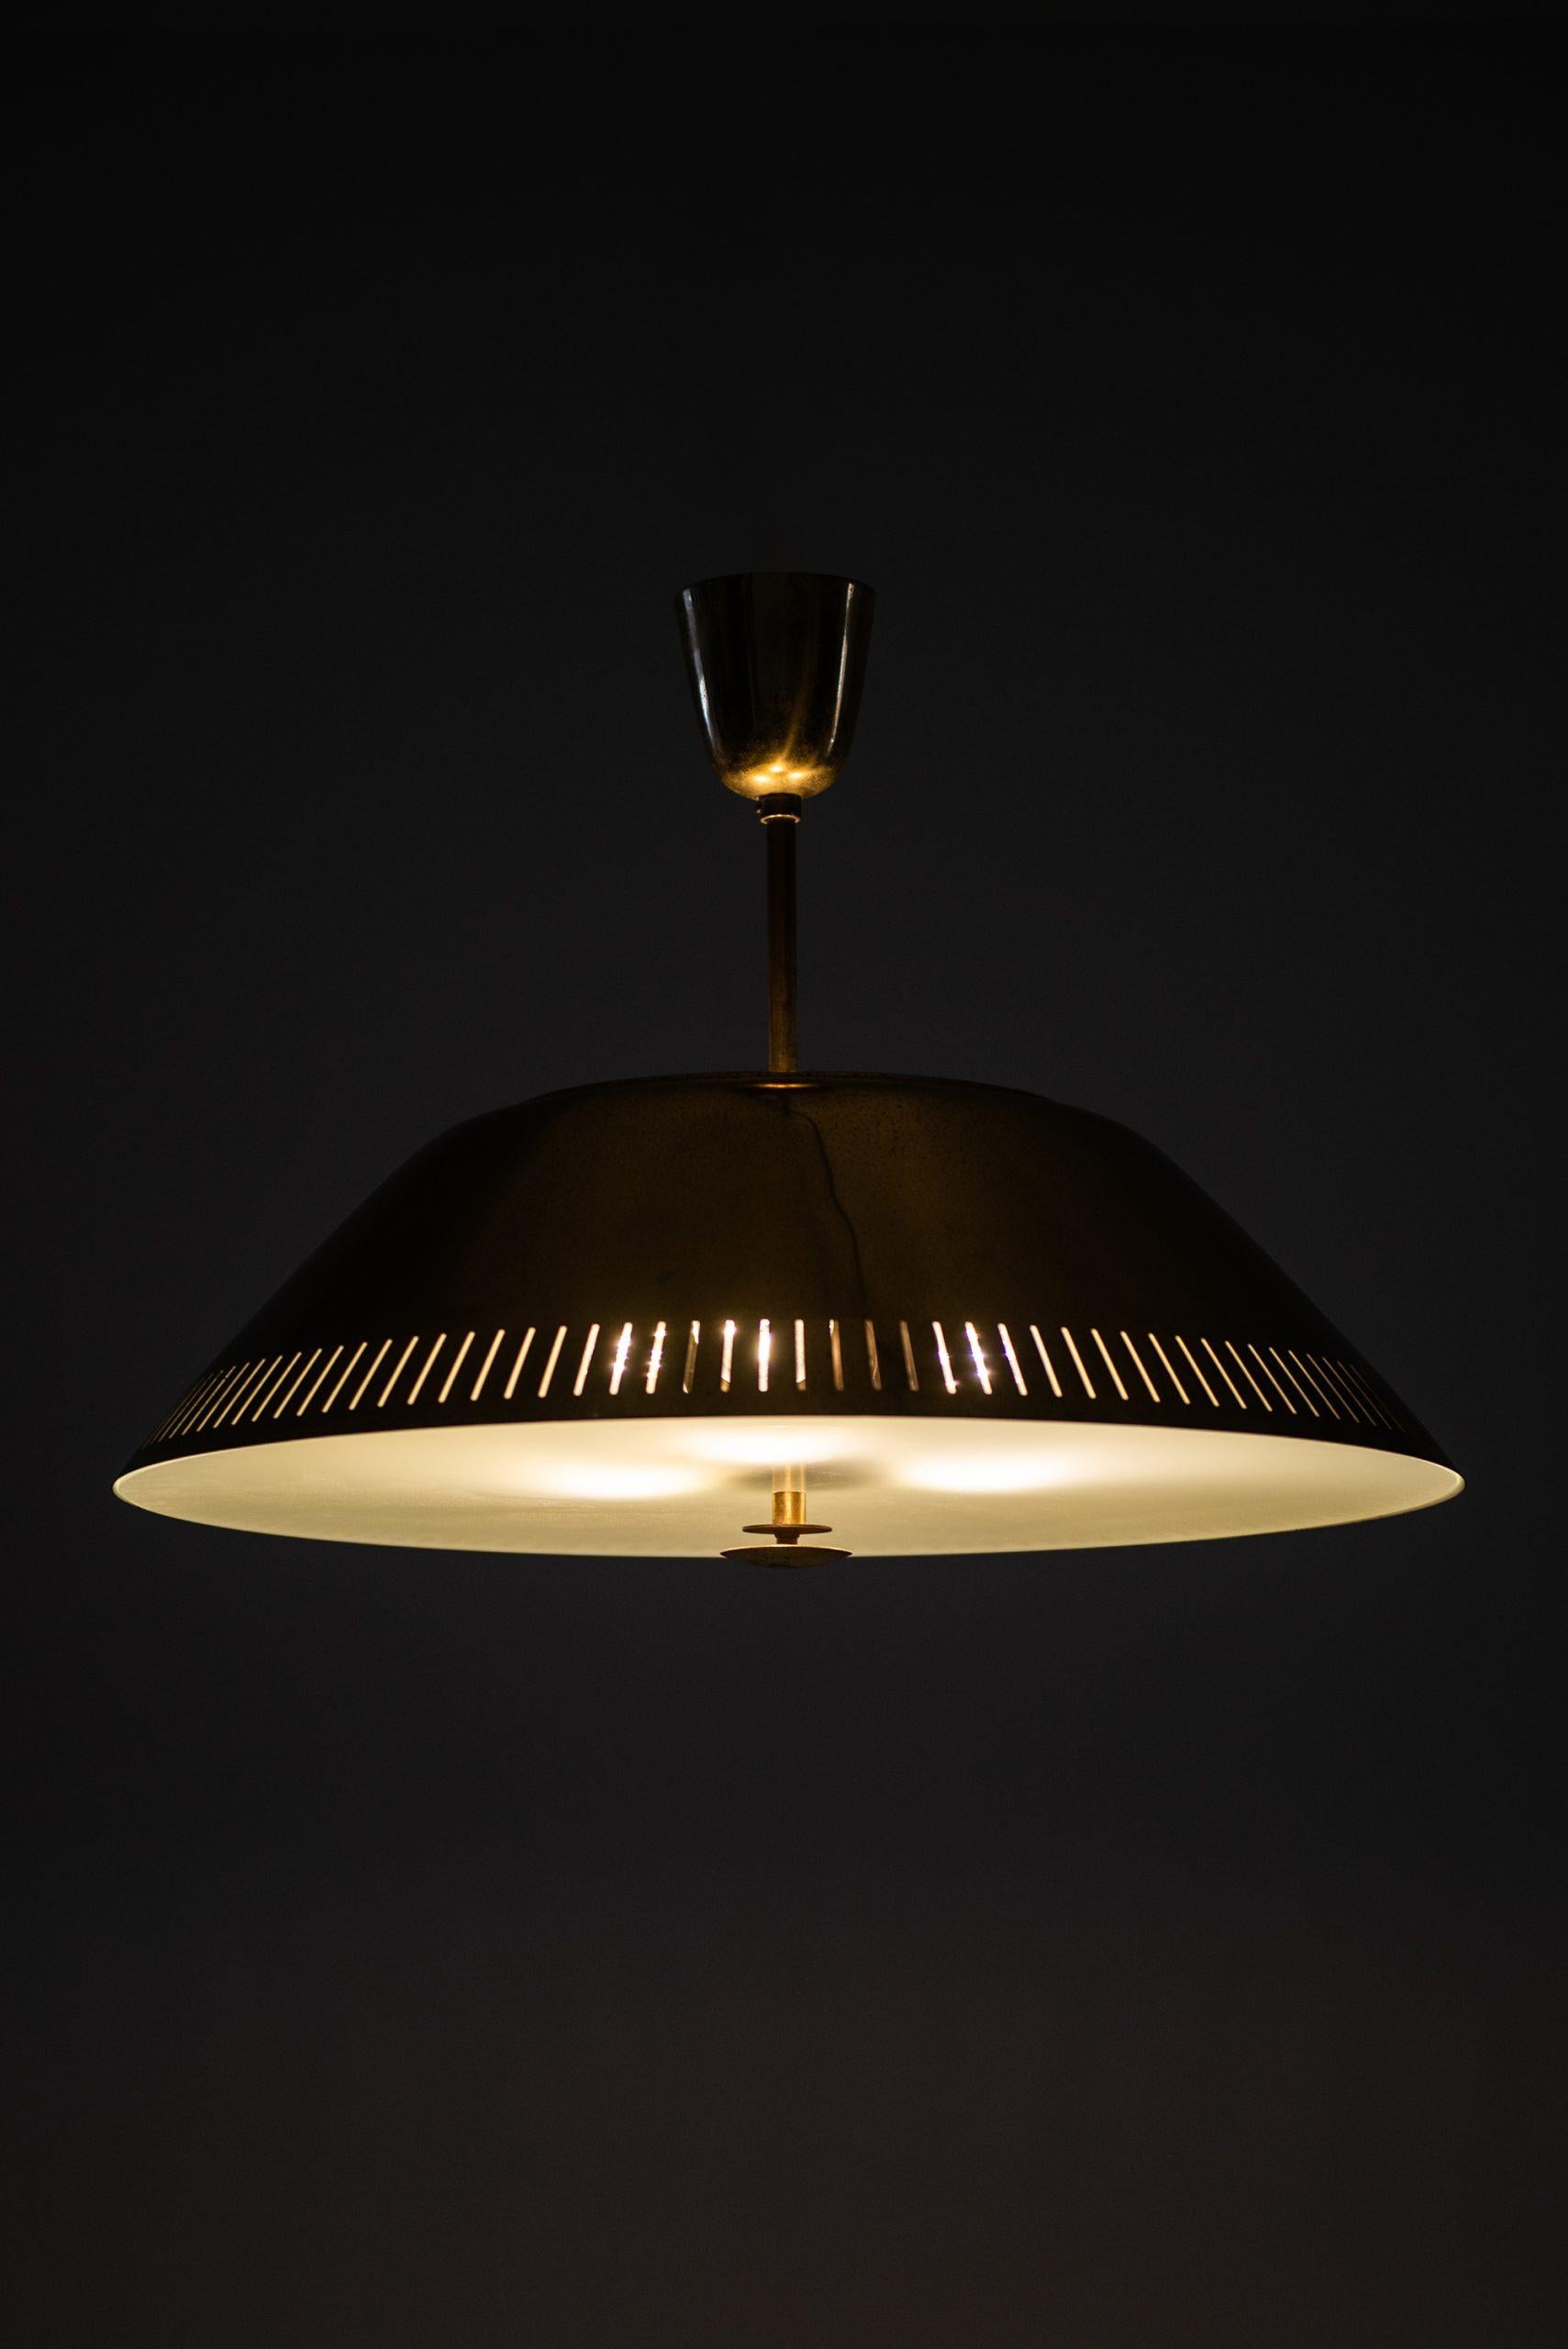 Scandinavian Modern Lisa Johansson-Pape Ceiling Lamp Produced by Orno in Finland